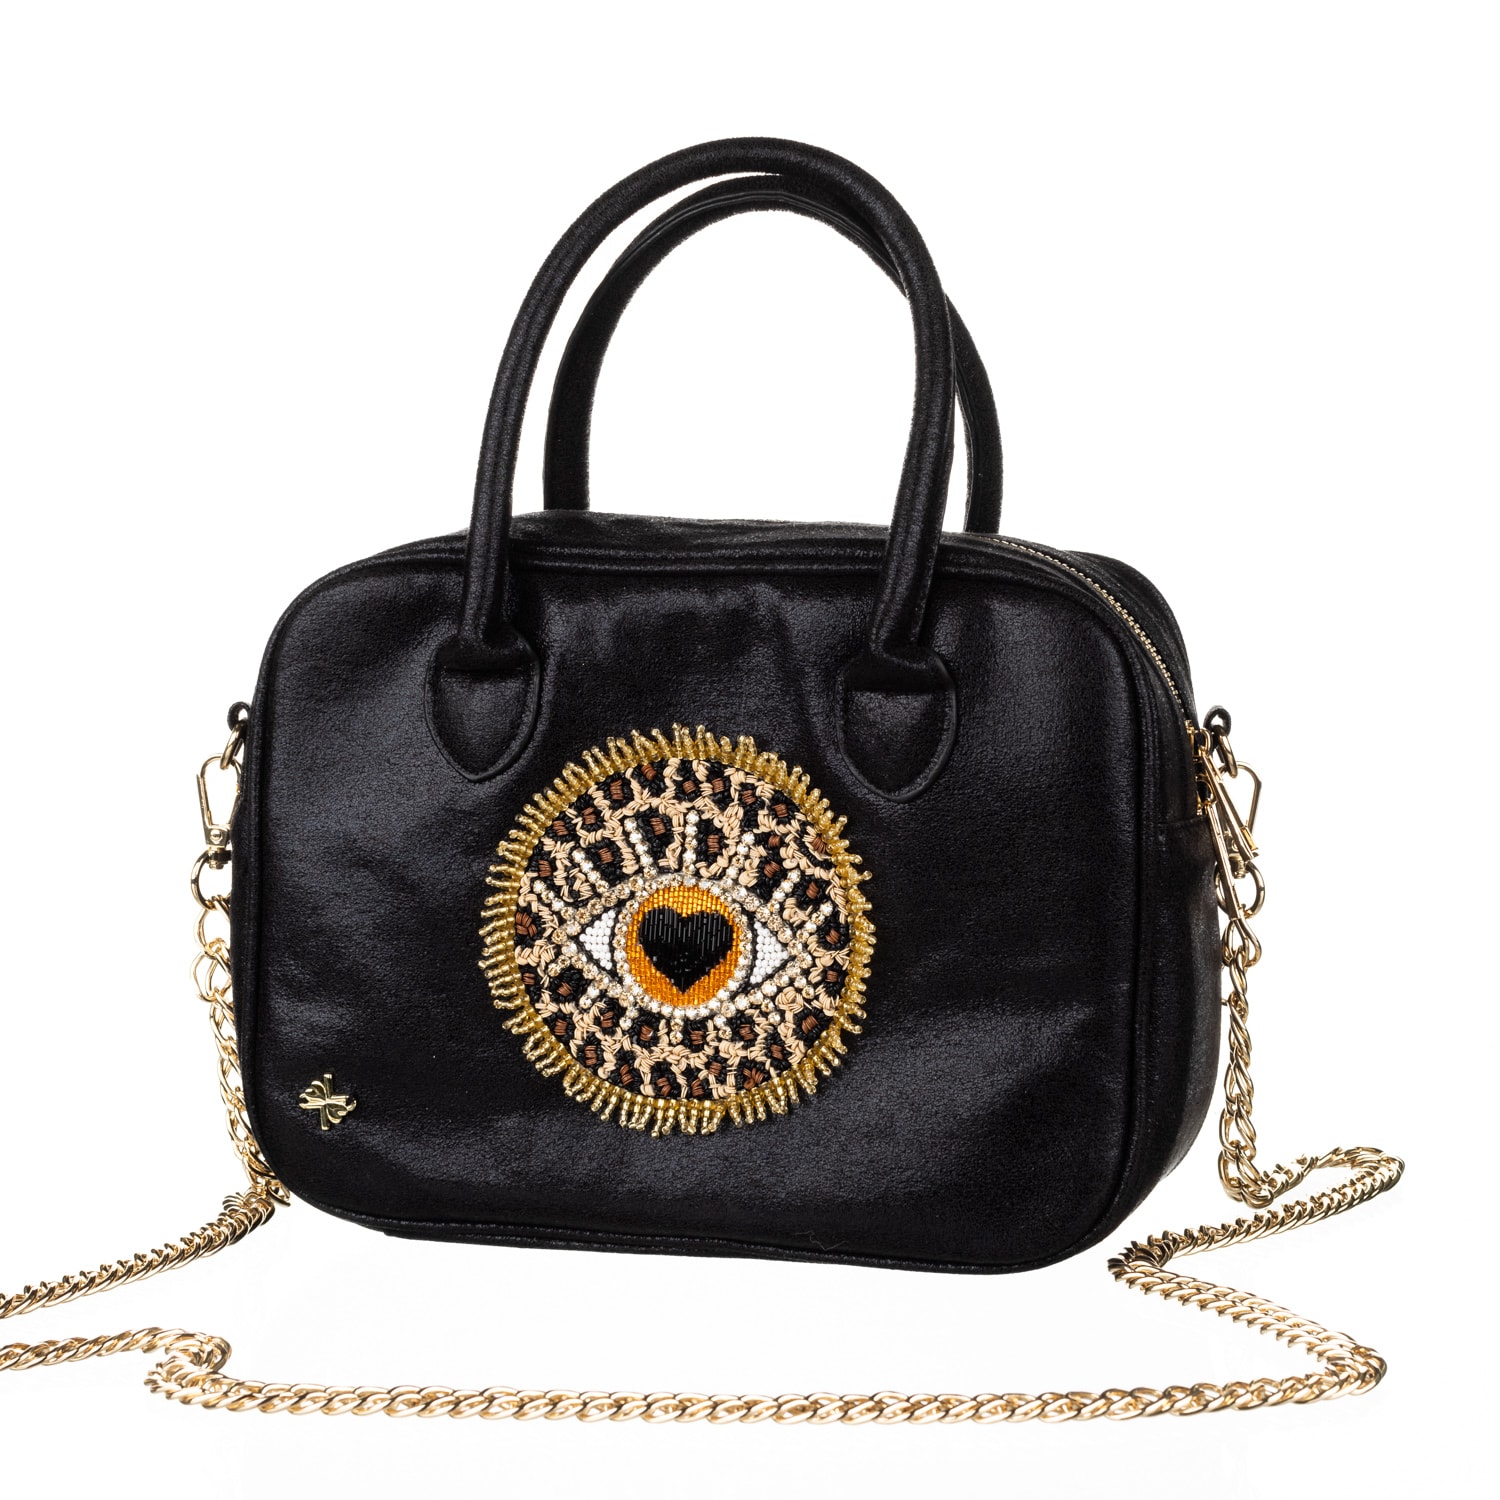 Women’s Laines London Couture Black Metallic Bag With Embellished Leopard Print Eye